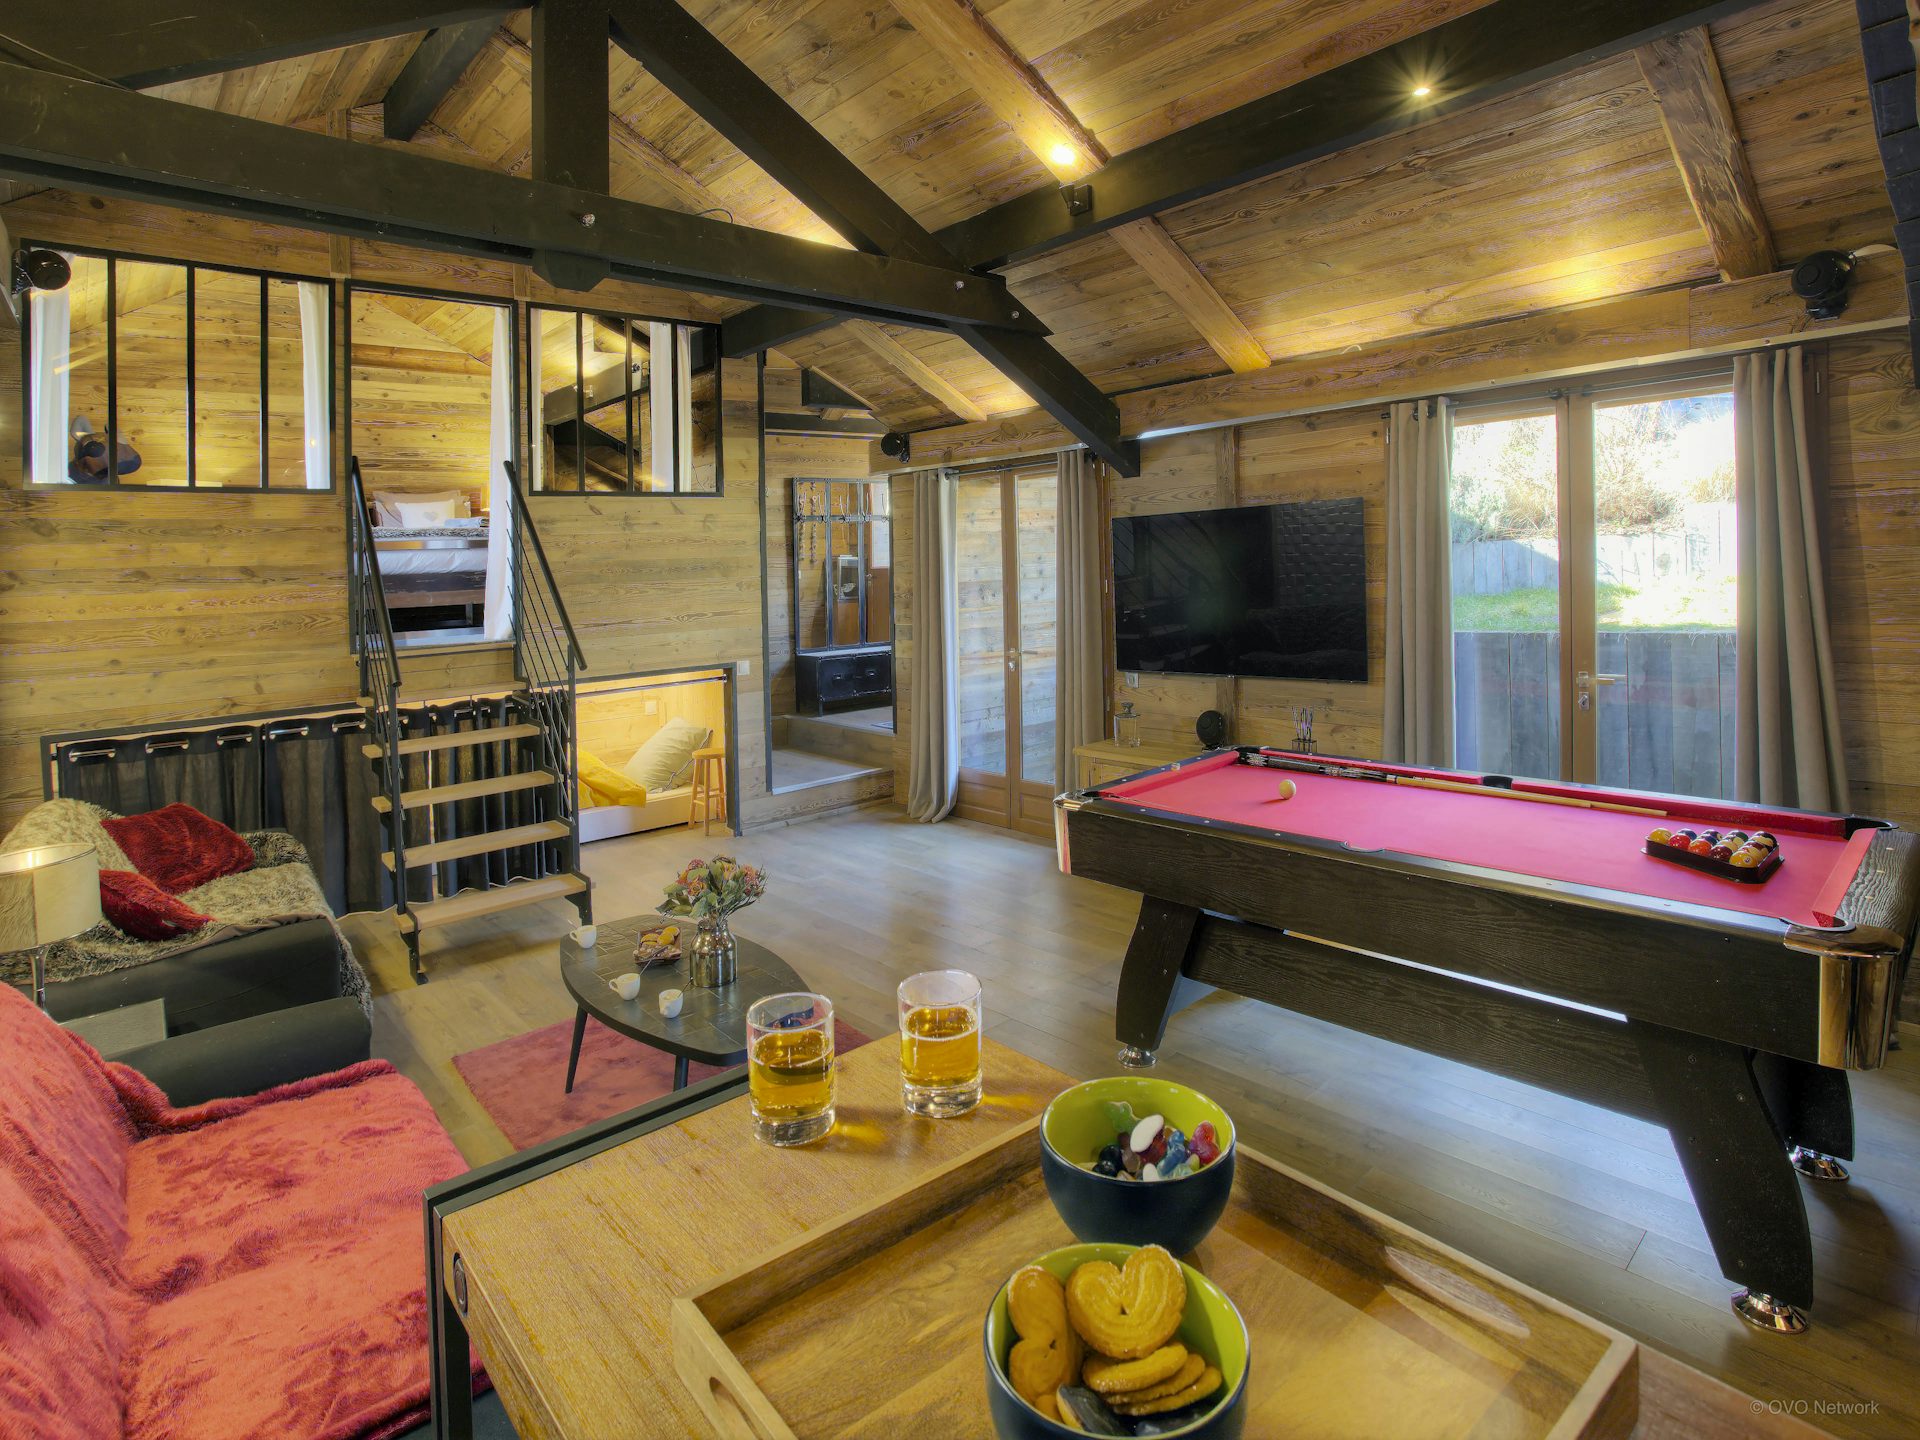 chalet-kalyssia-stylish-living-space-with-pool-table-tv-and-stairs-to-bedroom